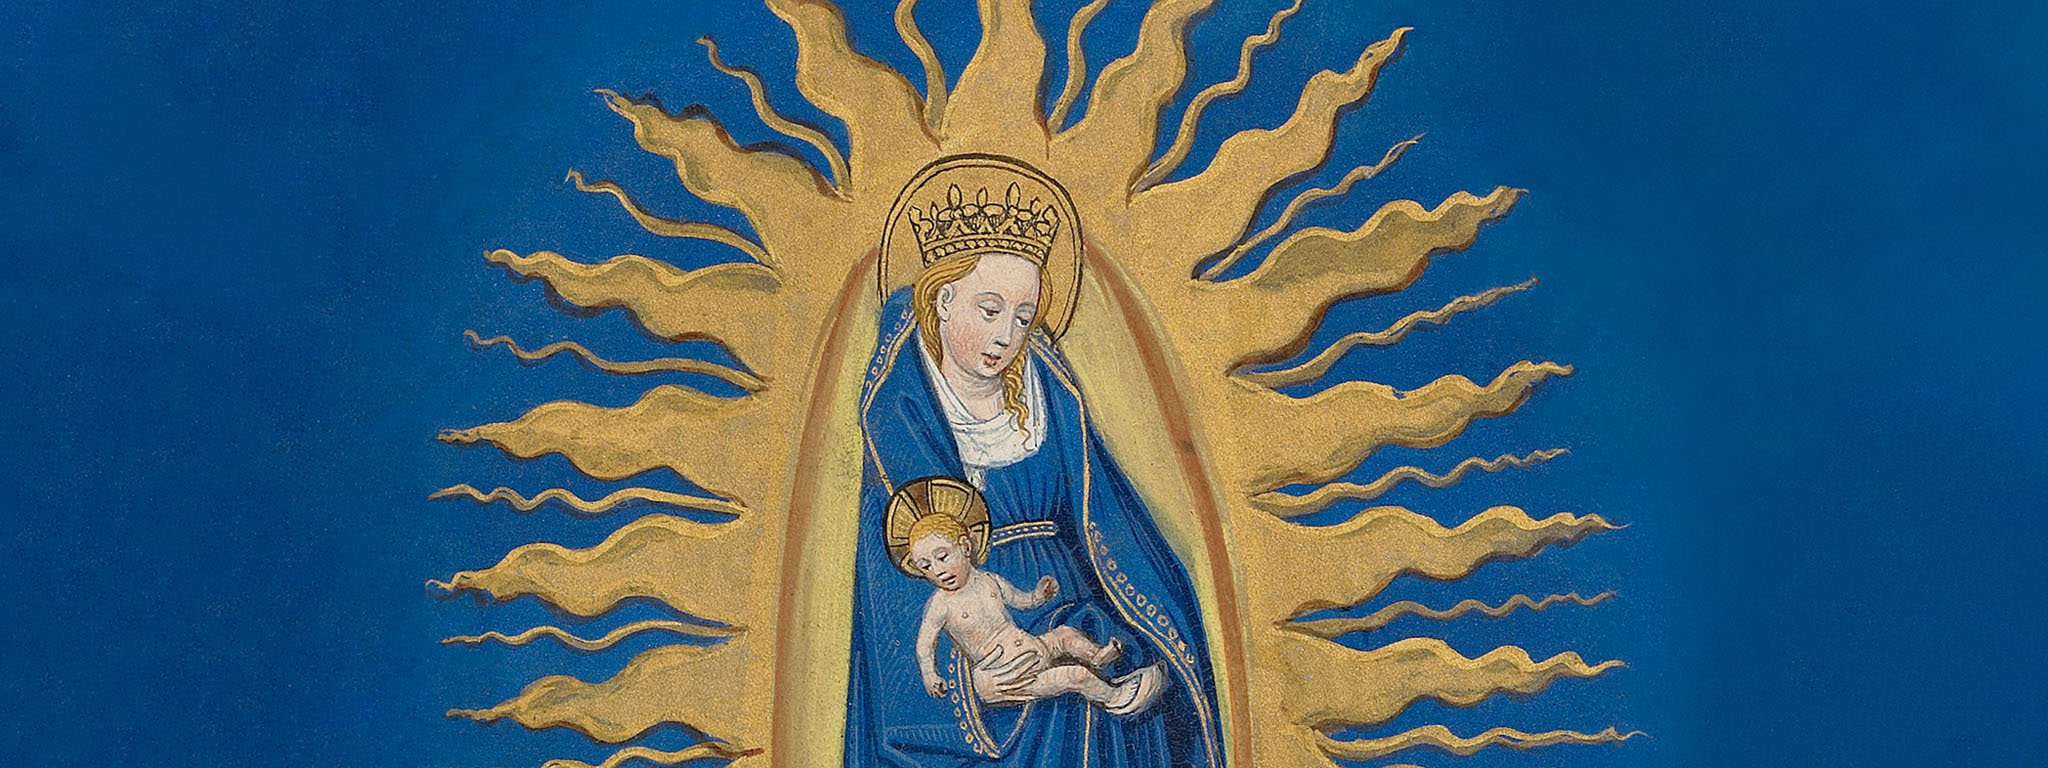 The Virgin and Child (detail), from Arenberg Hours, early 1460s, Willem Vrelant. Tempera colors, gold leaf, and ink on parchment. Getty Museum, Ms. Ludwig IX 8 (83.ML.104), fol. 121